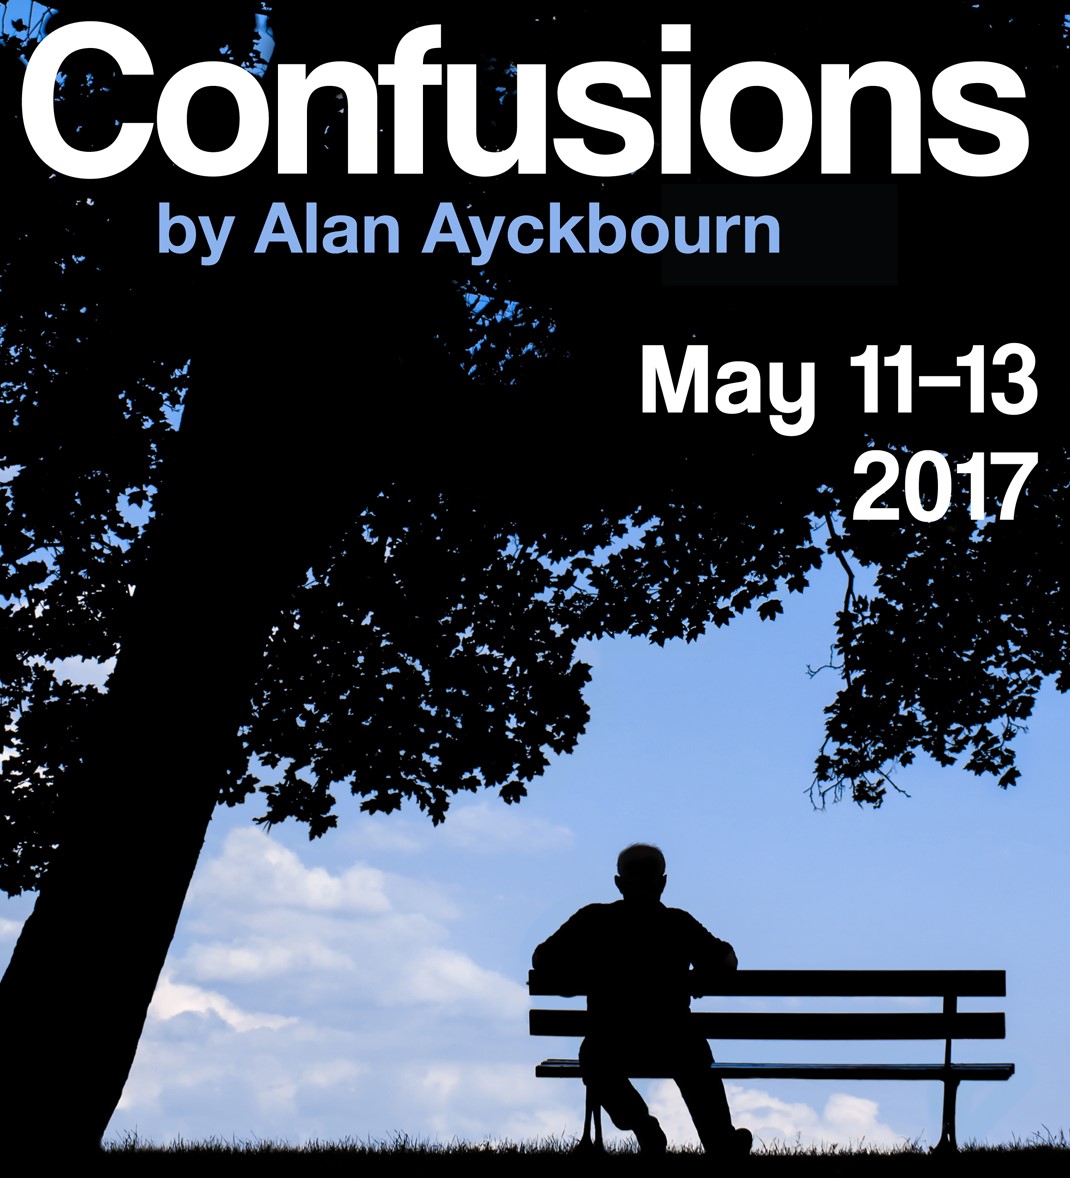 Confusions - a play by Alan Ayckbourn presented by The Downsview Players